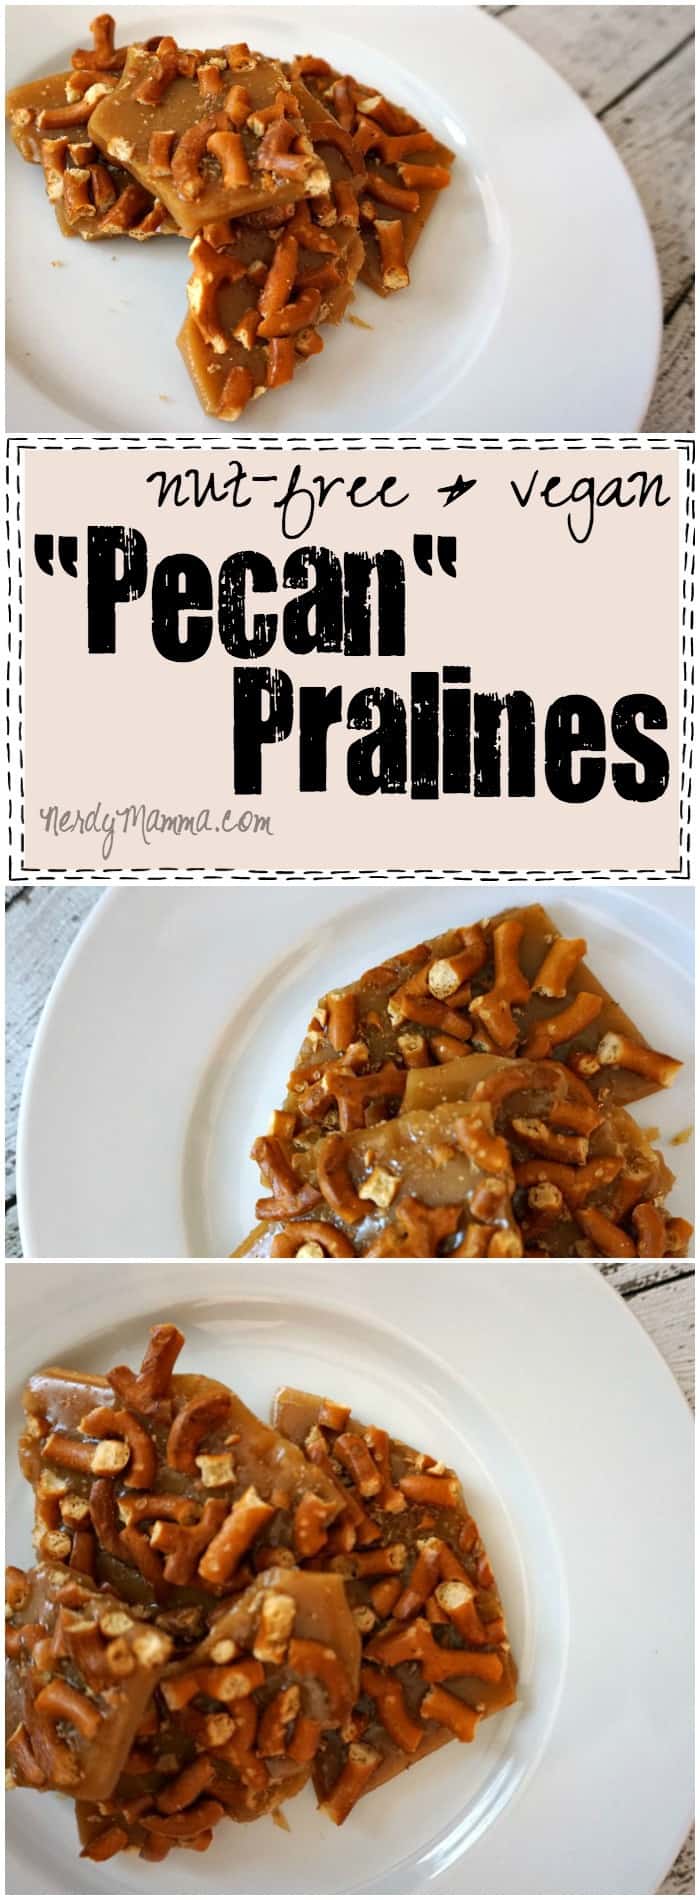 Nut-free and Vegan Pecan Pralines! THIS IS AMAZING. I can't wait to make a batch!